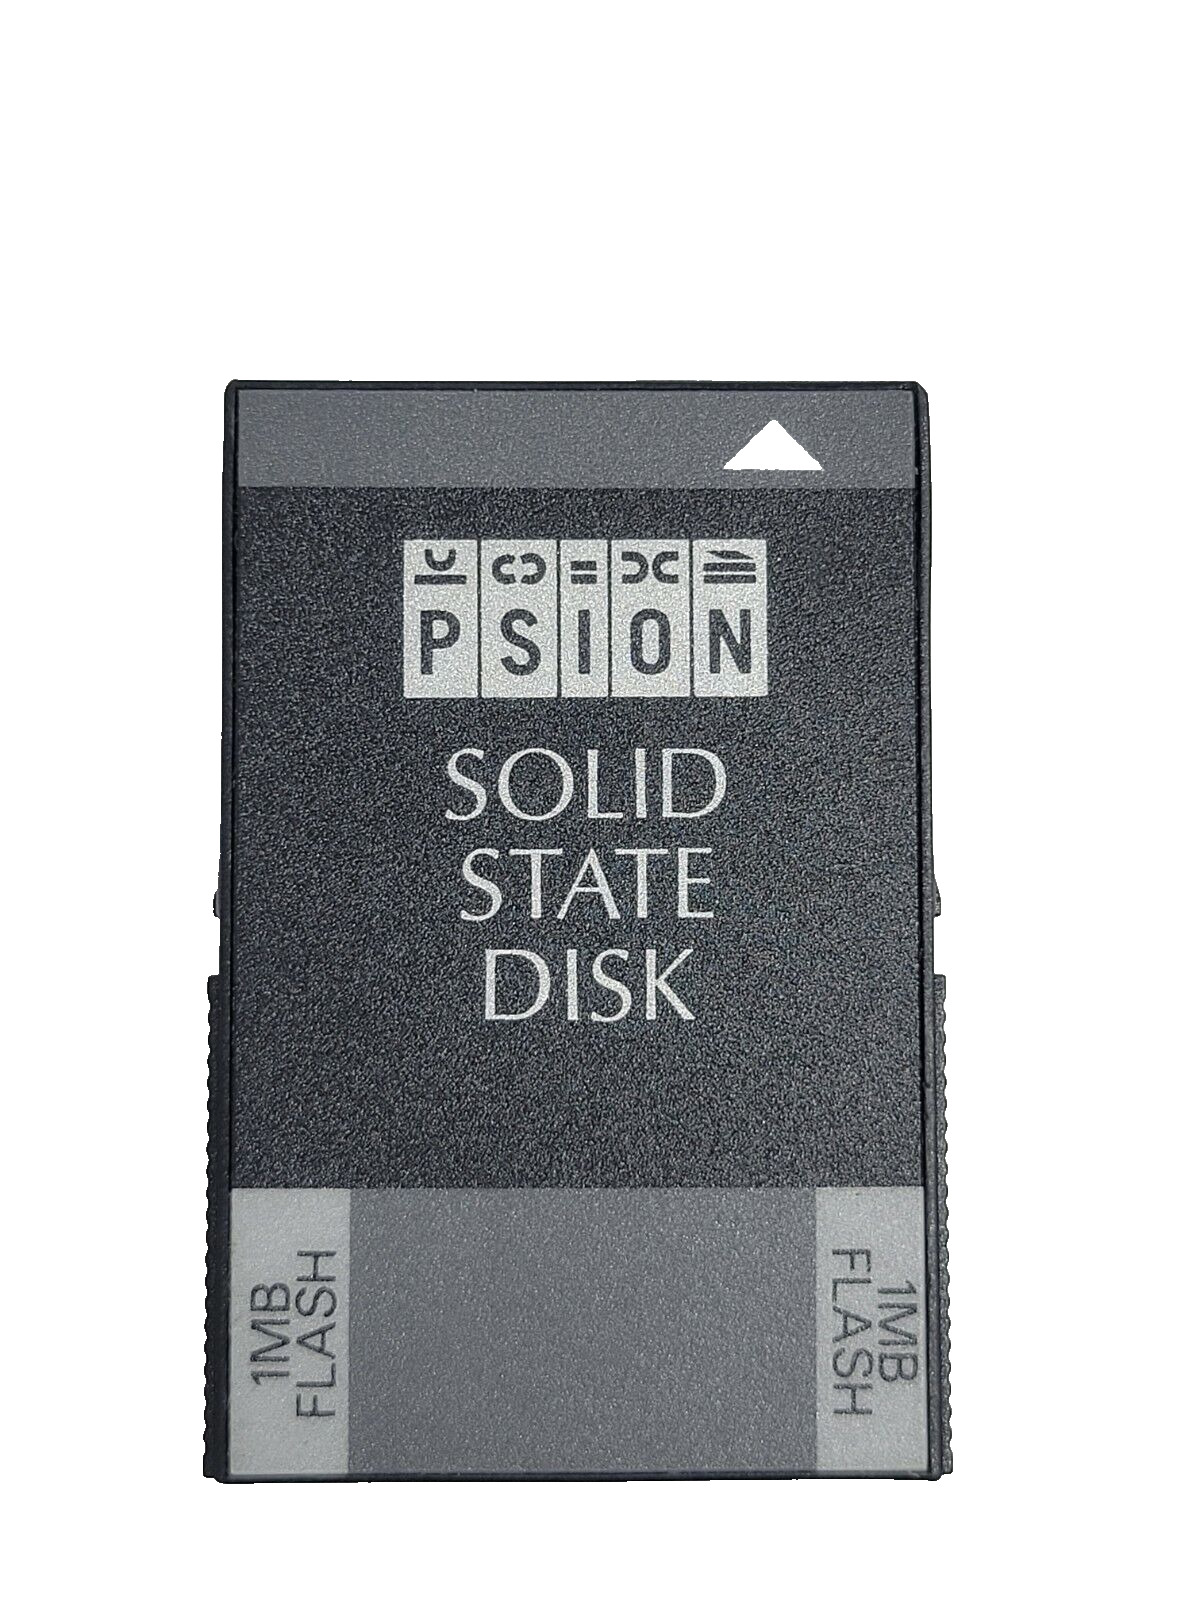 Psion Solid State Disk 1MB Flash SSD for Workabout and MX Series